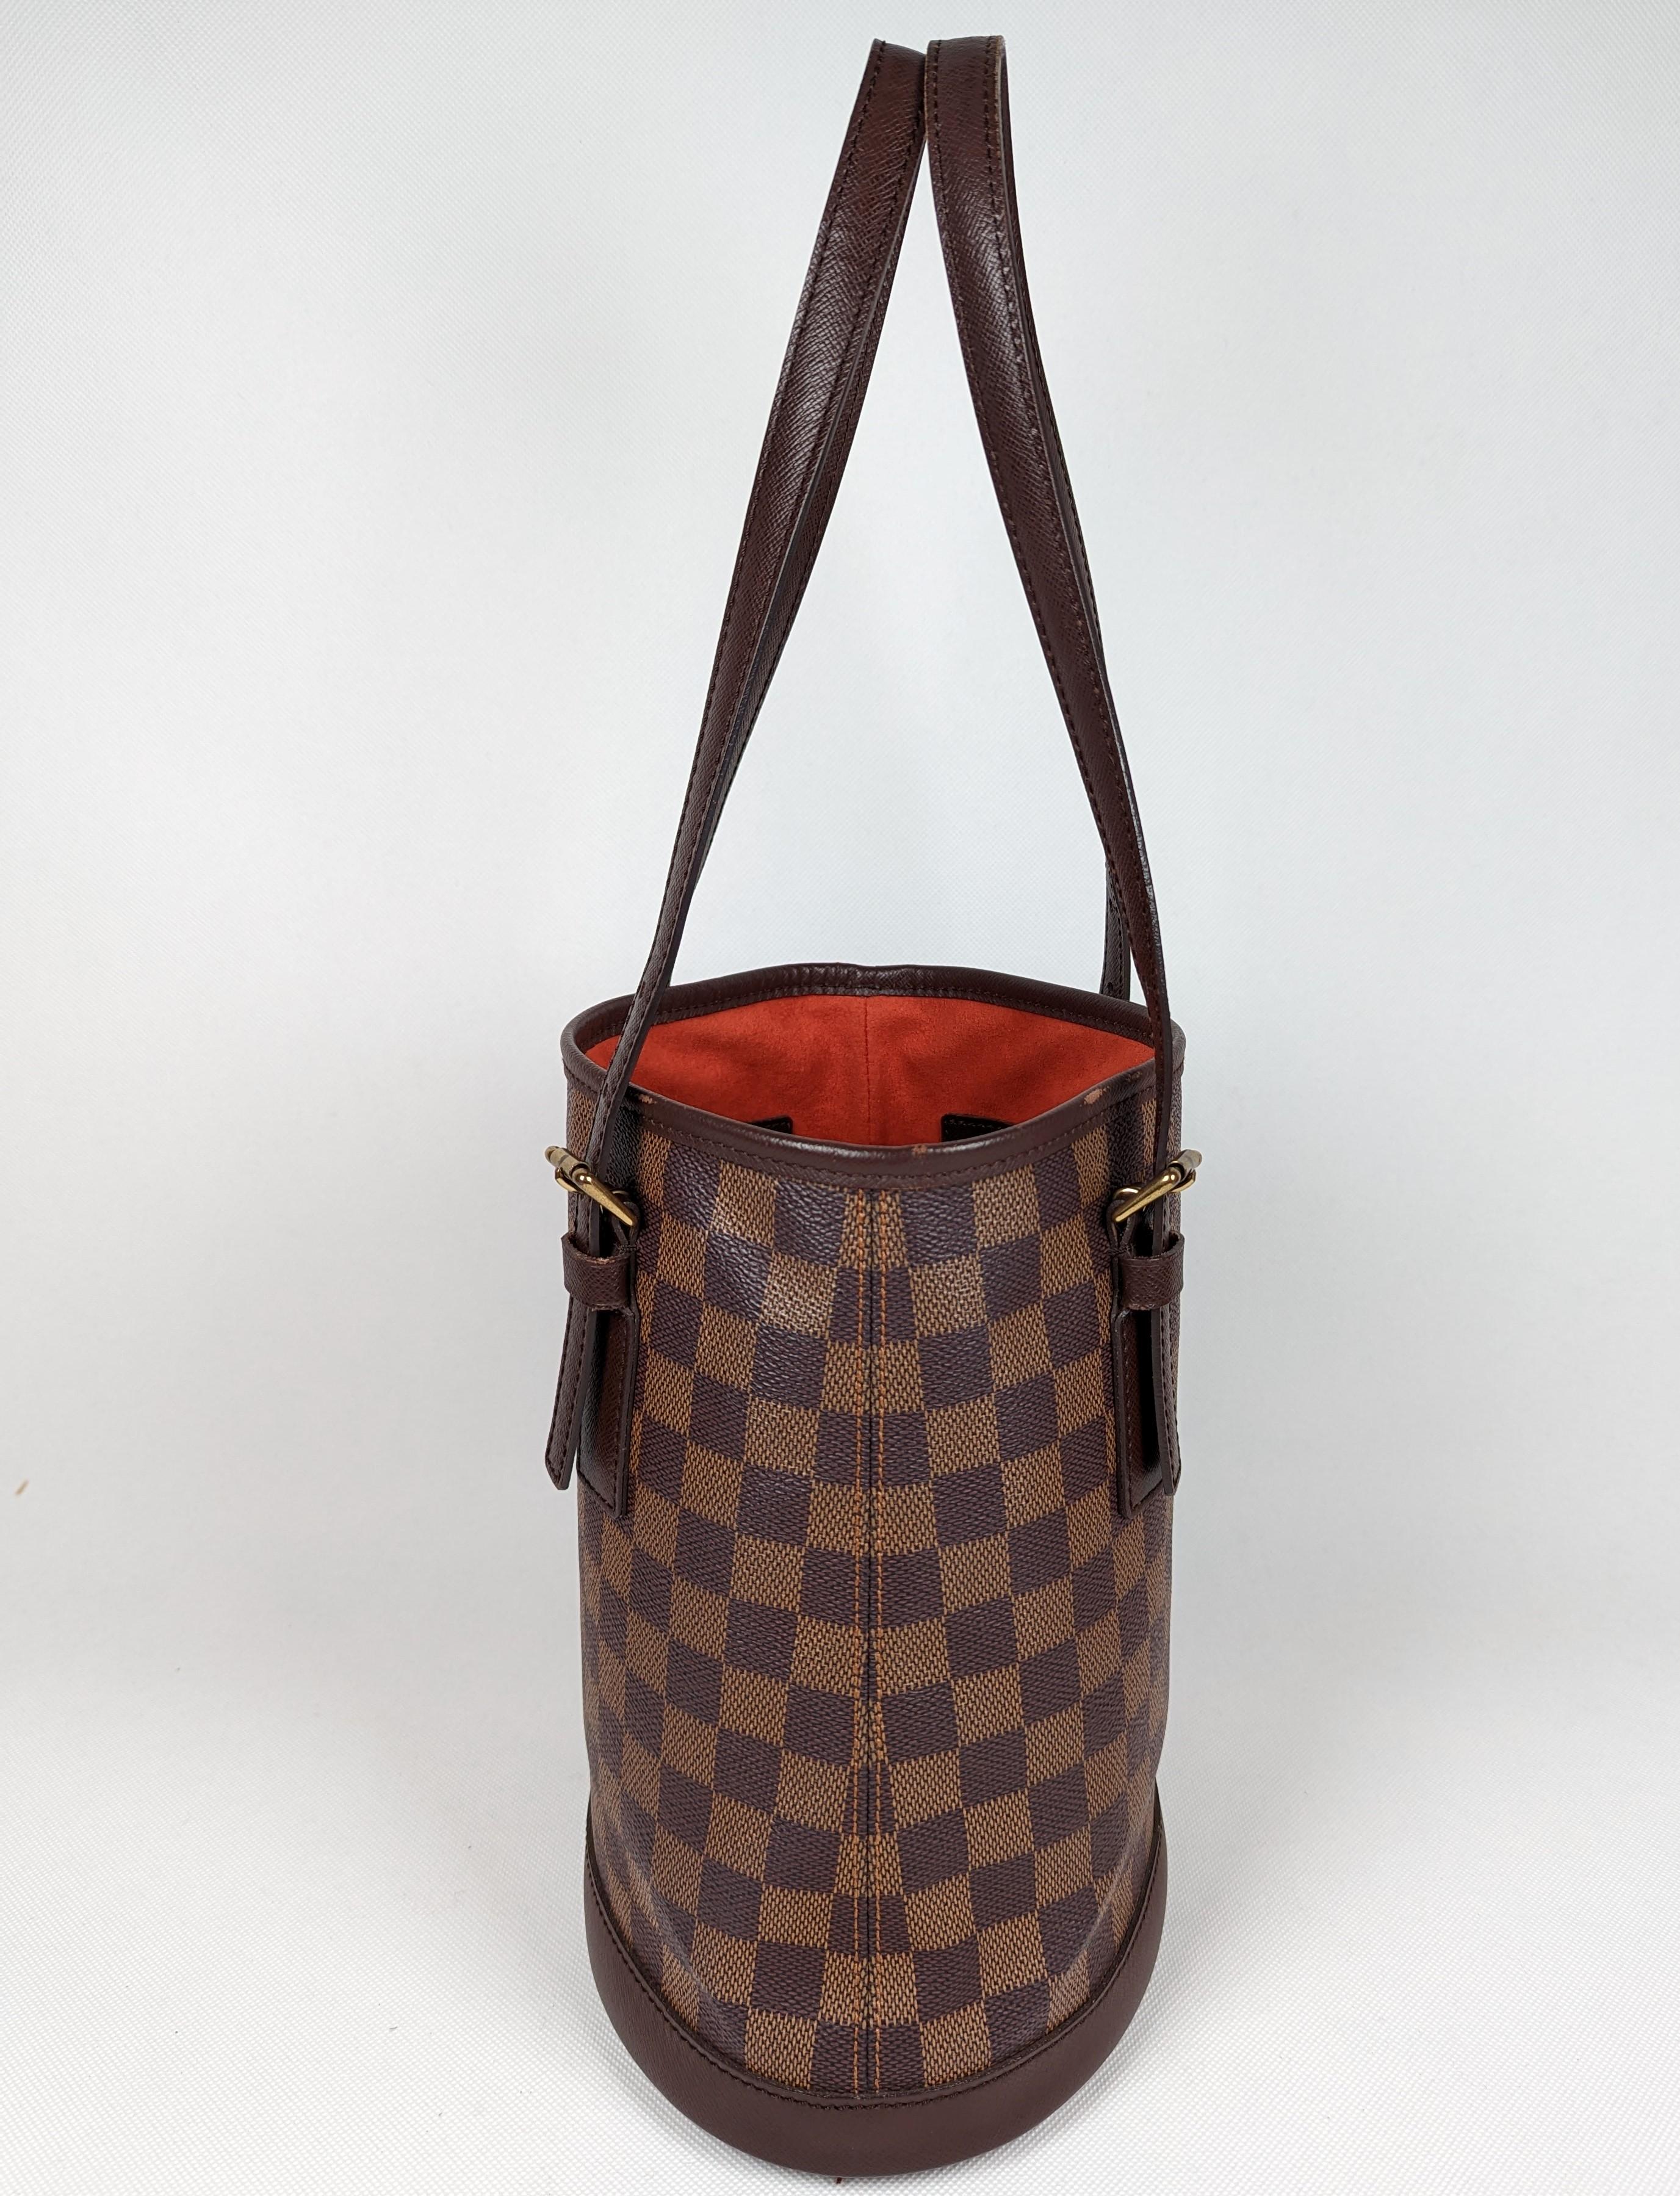 The Louis Vuitton Damier Canvas Marais Bucket Bag is a timeless piece that will never go out of style. It features a roomy interior with zip pockets for securing essentials, and adjustable shoulder straps. Here's a perfect city bag for everyday